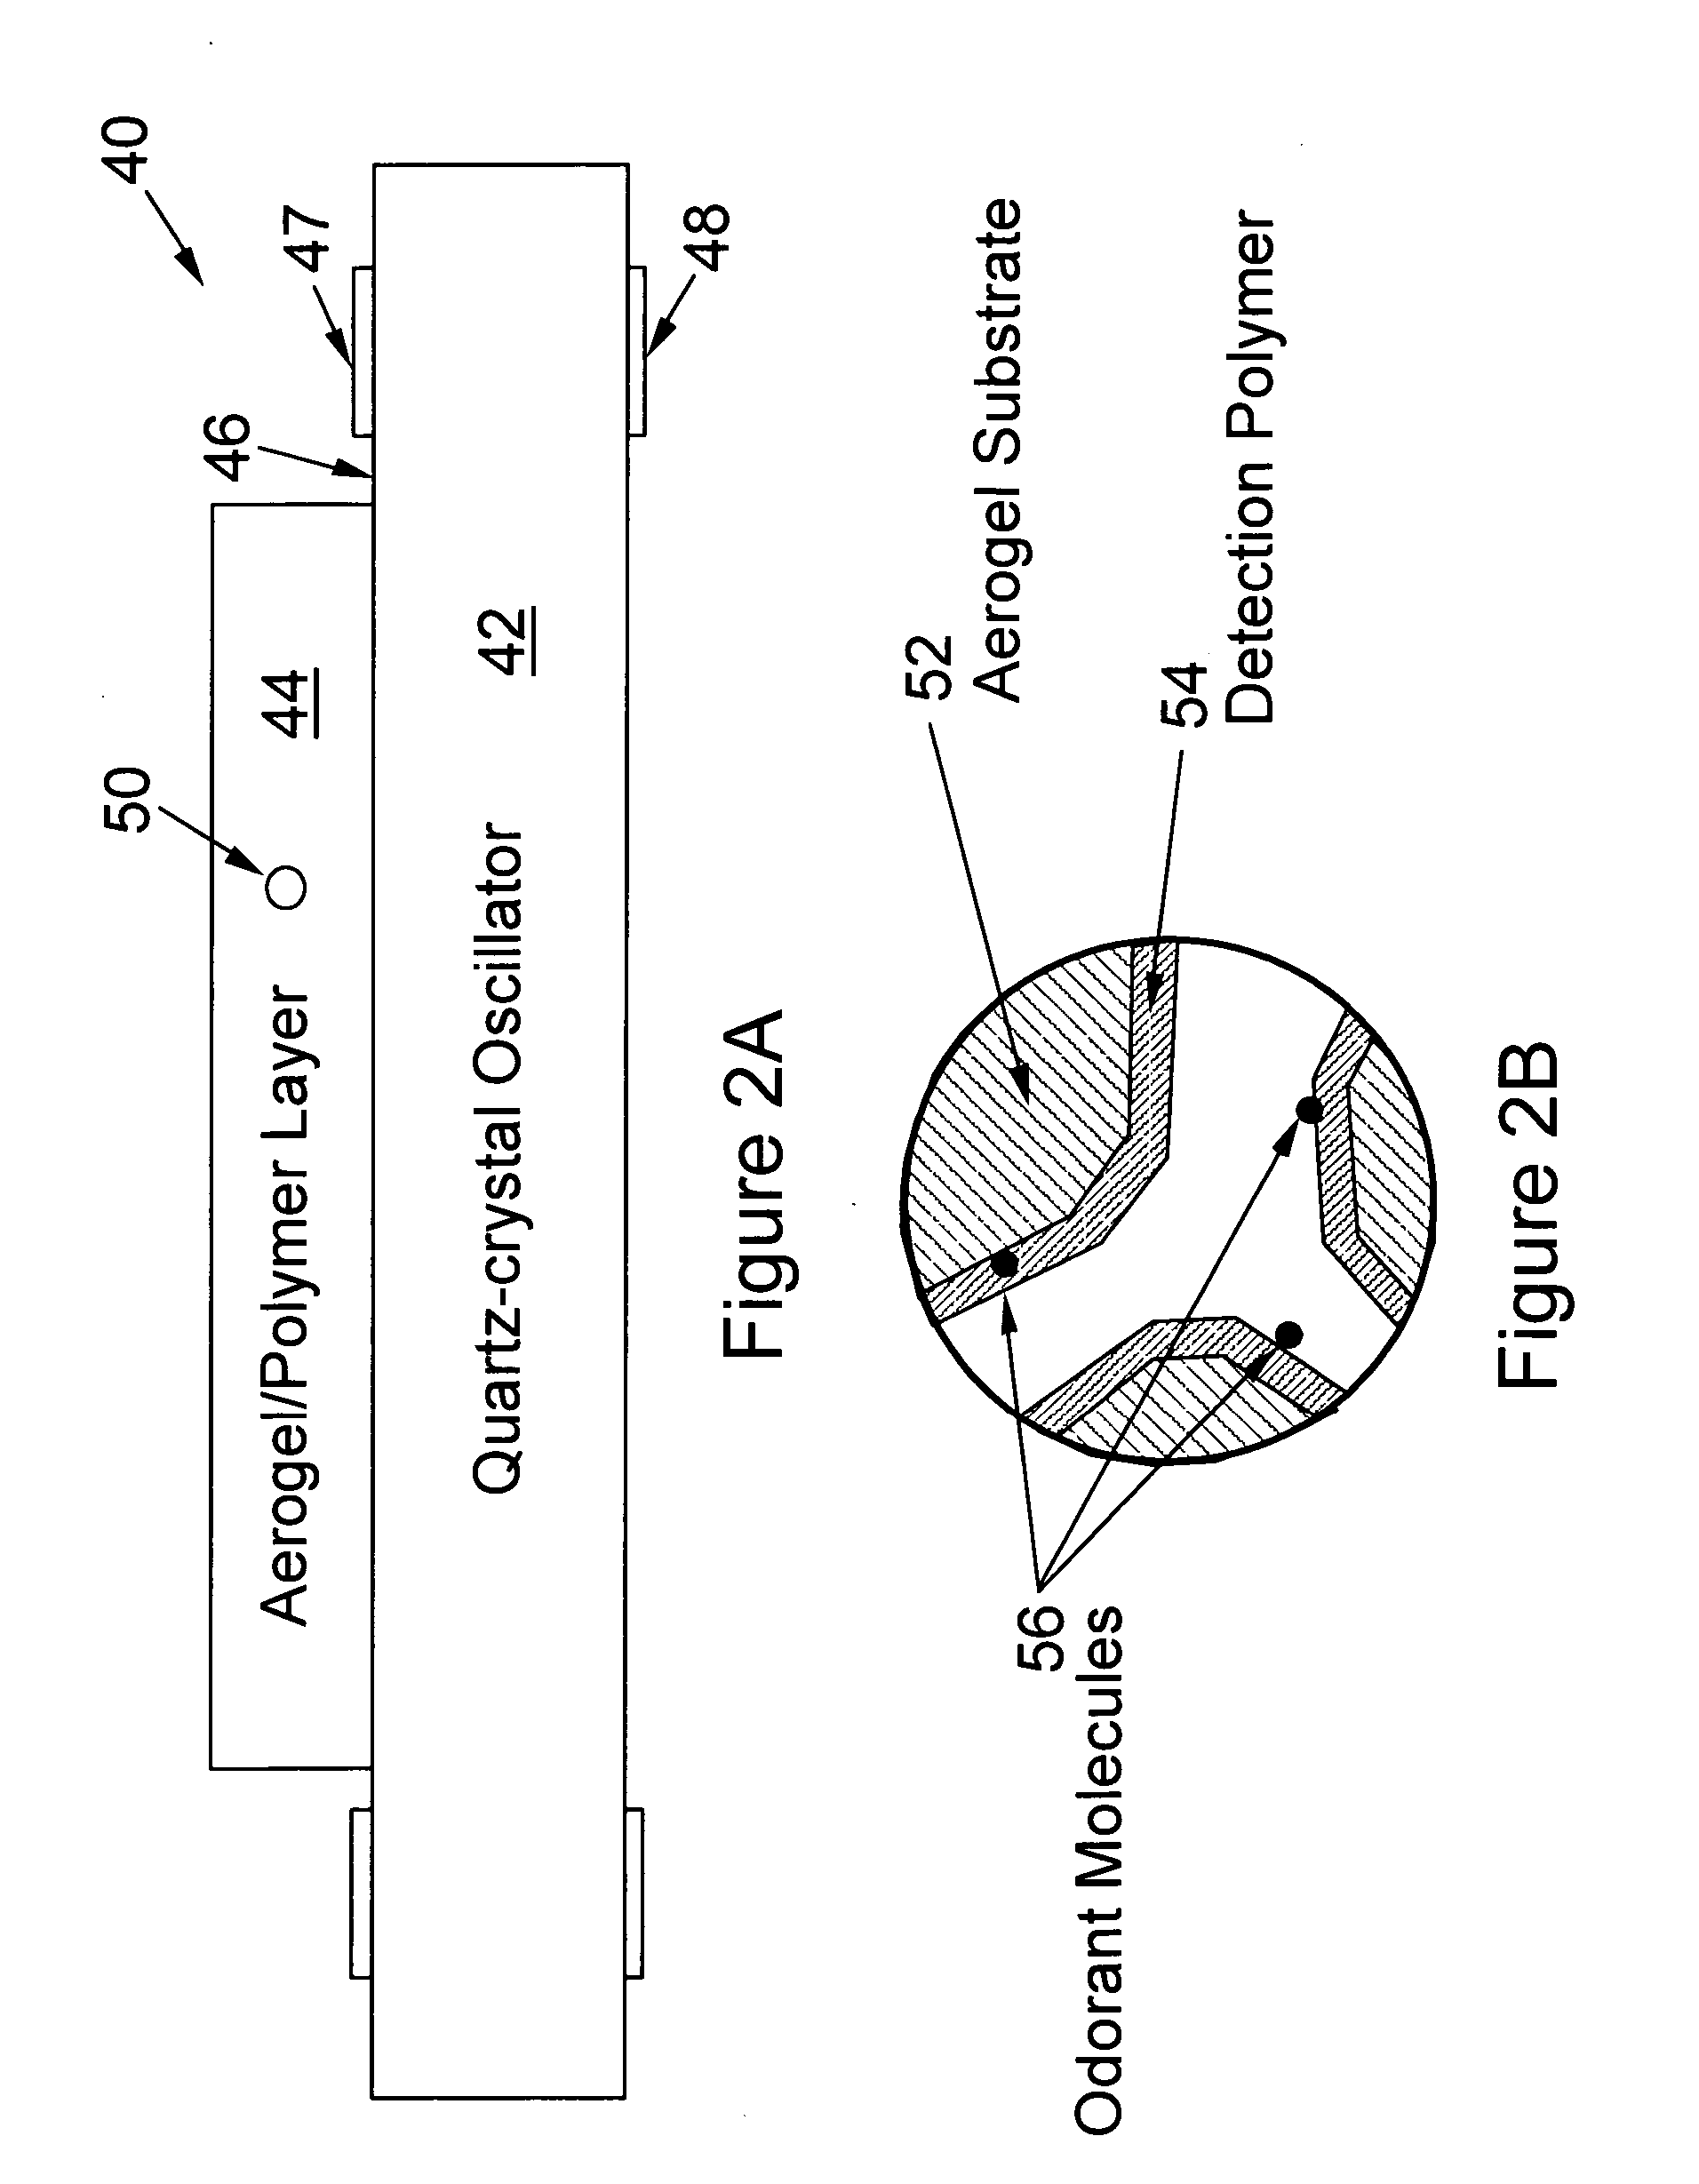 Ultrasensitive olfactory system fabrication with doped aerogels